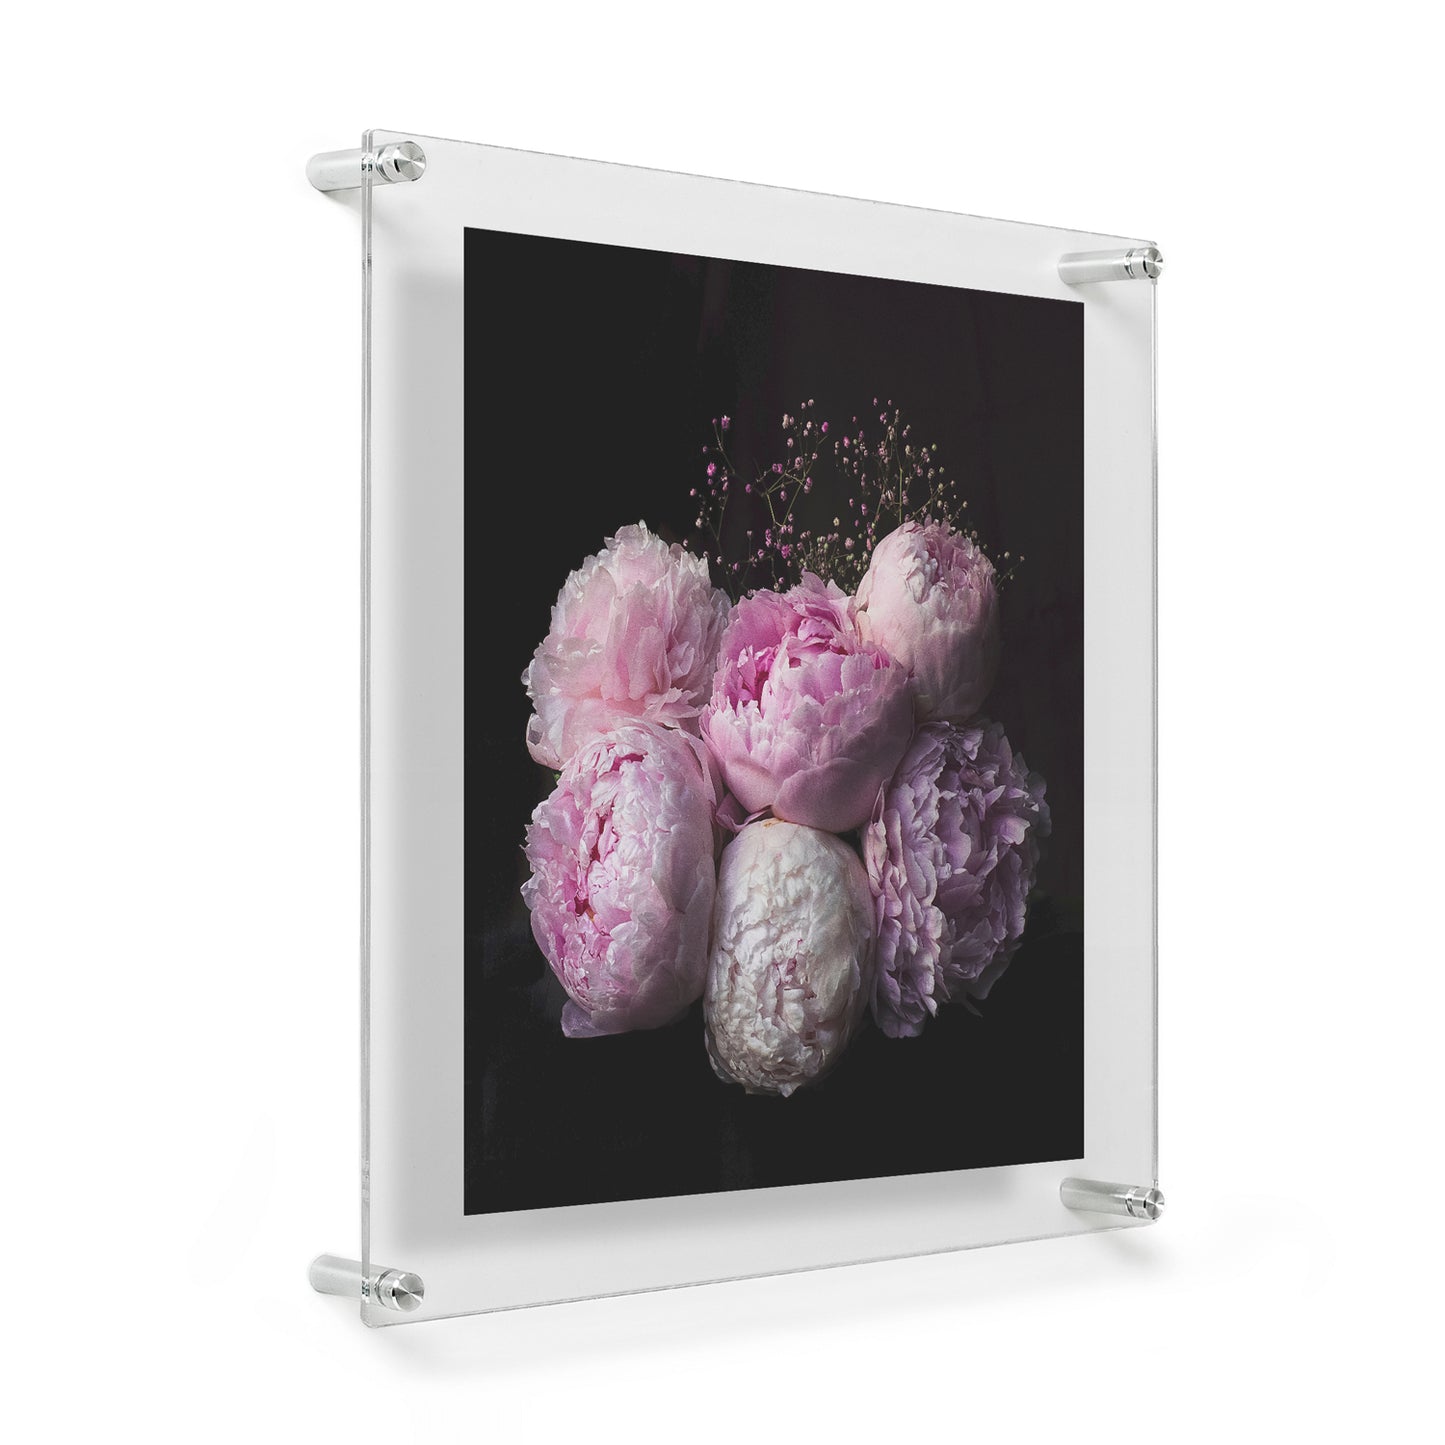 20x20" Photo Floating Acrylic Clear Picture Frame (Frame Size 23x23")